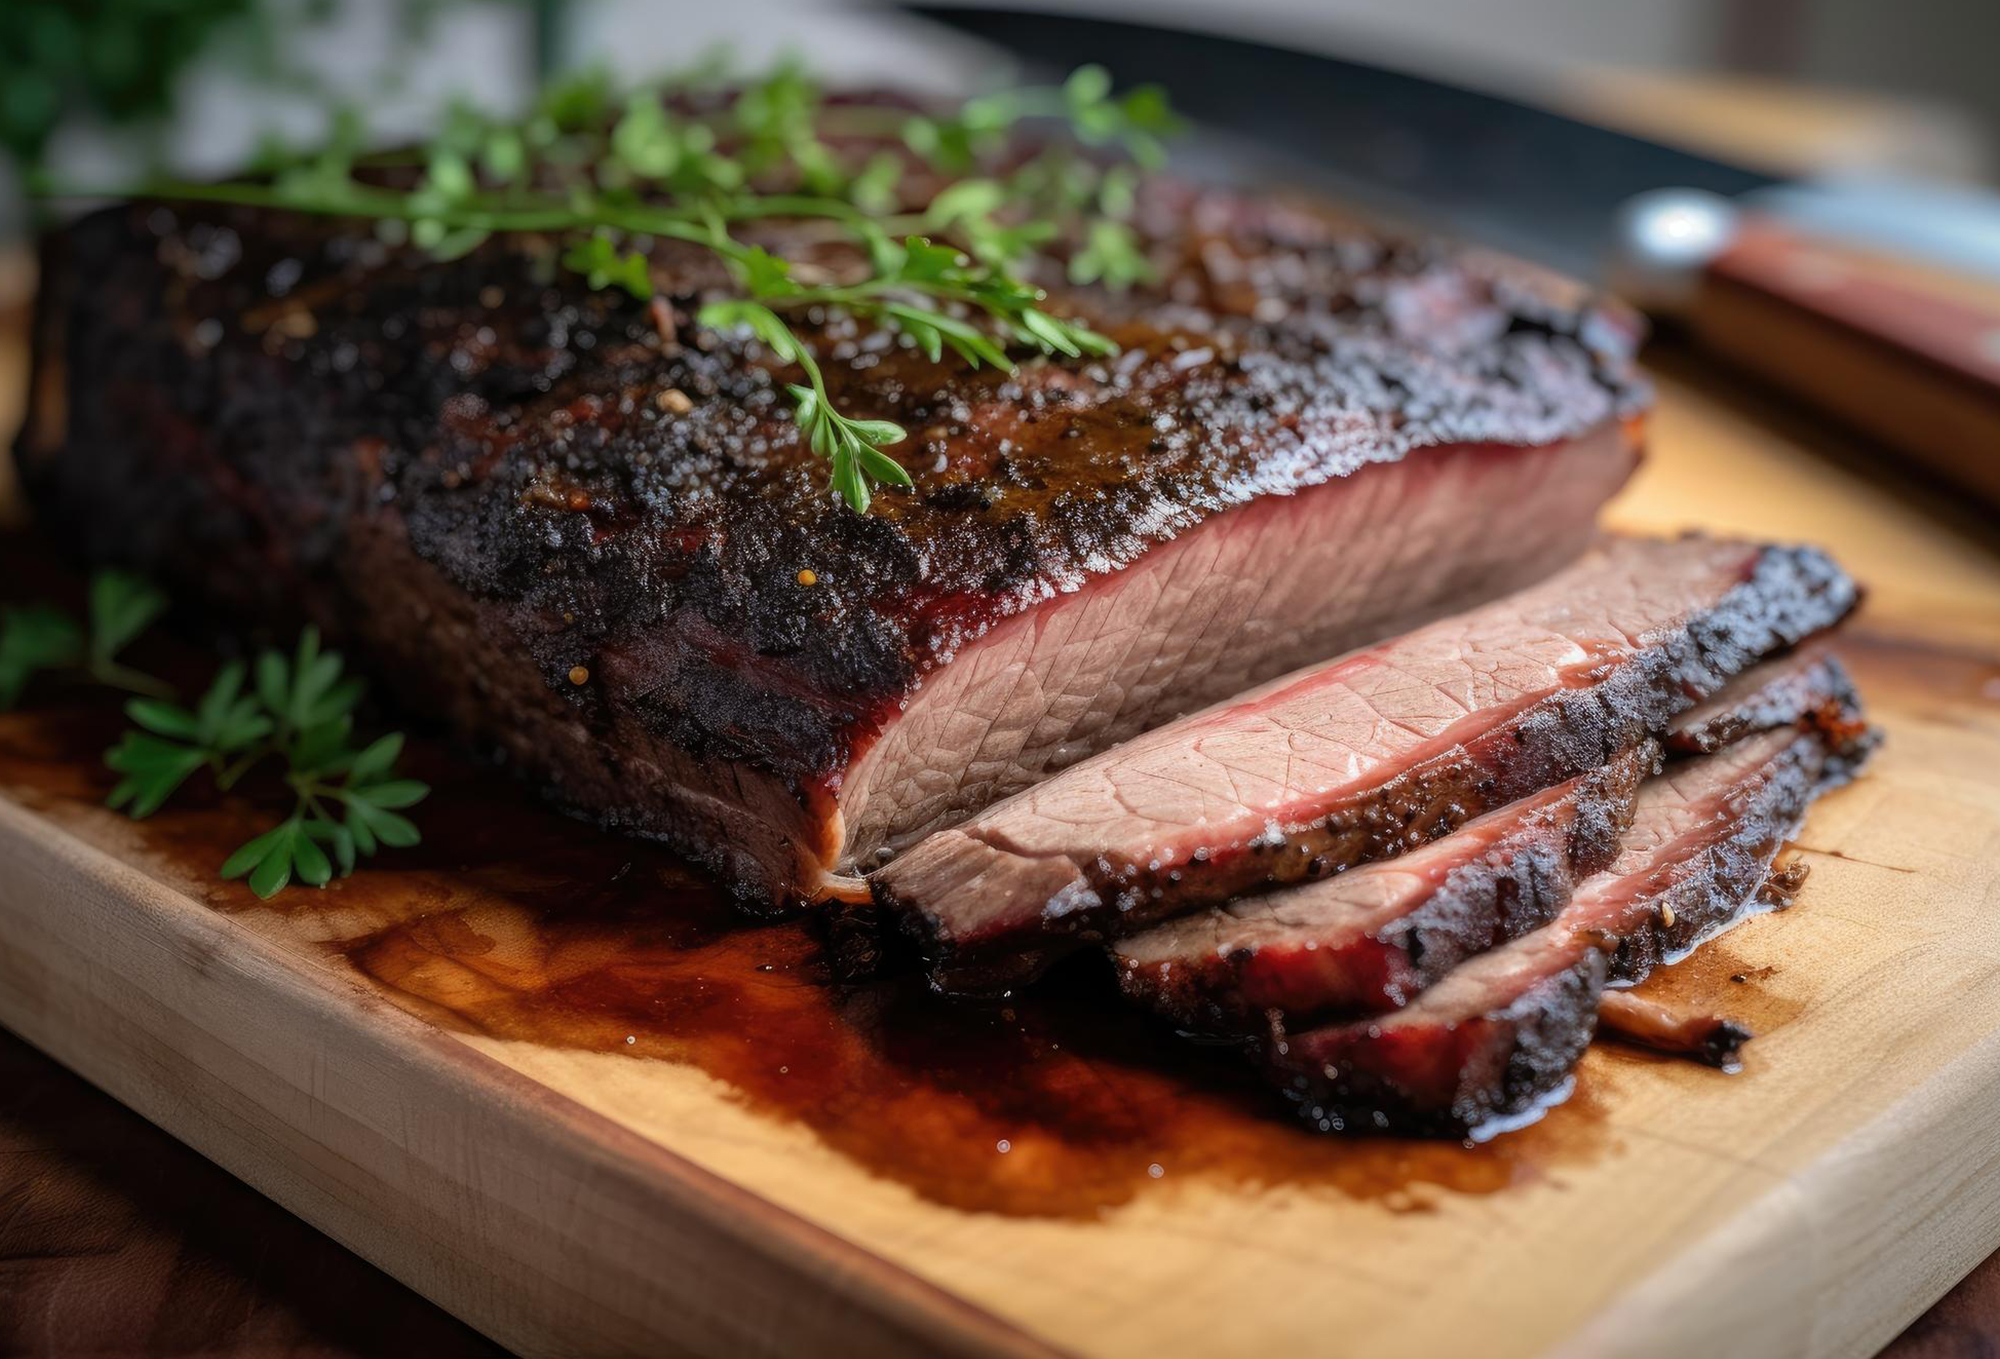 The Brisket: A Meat Lover's Delight